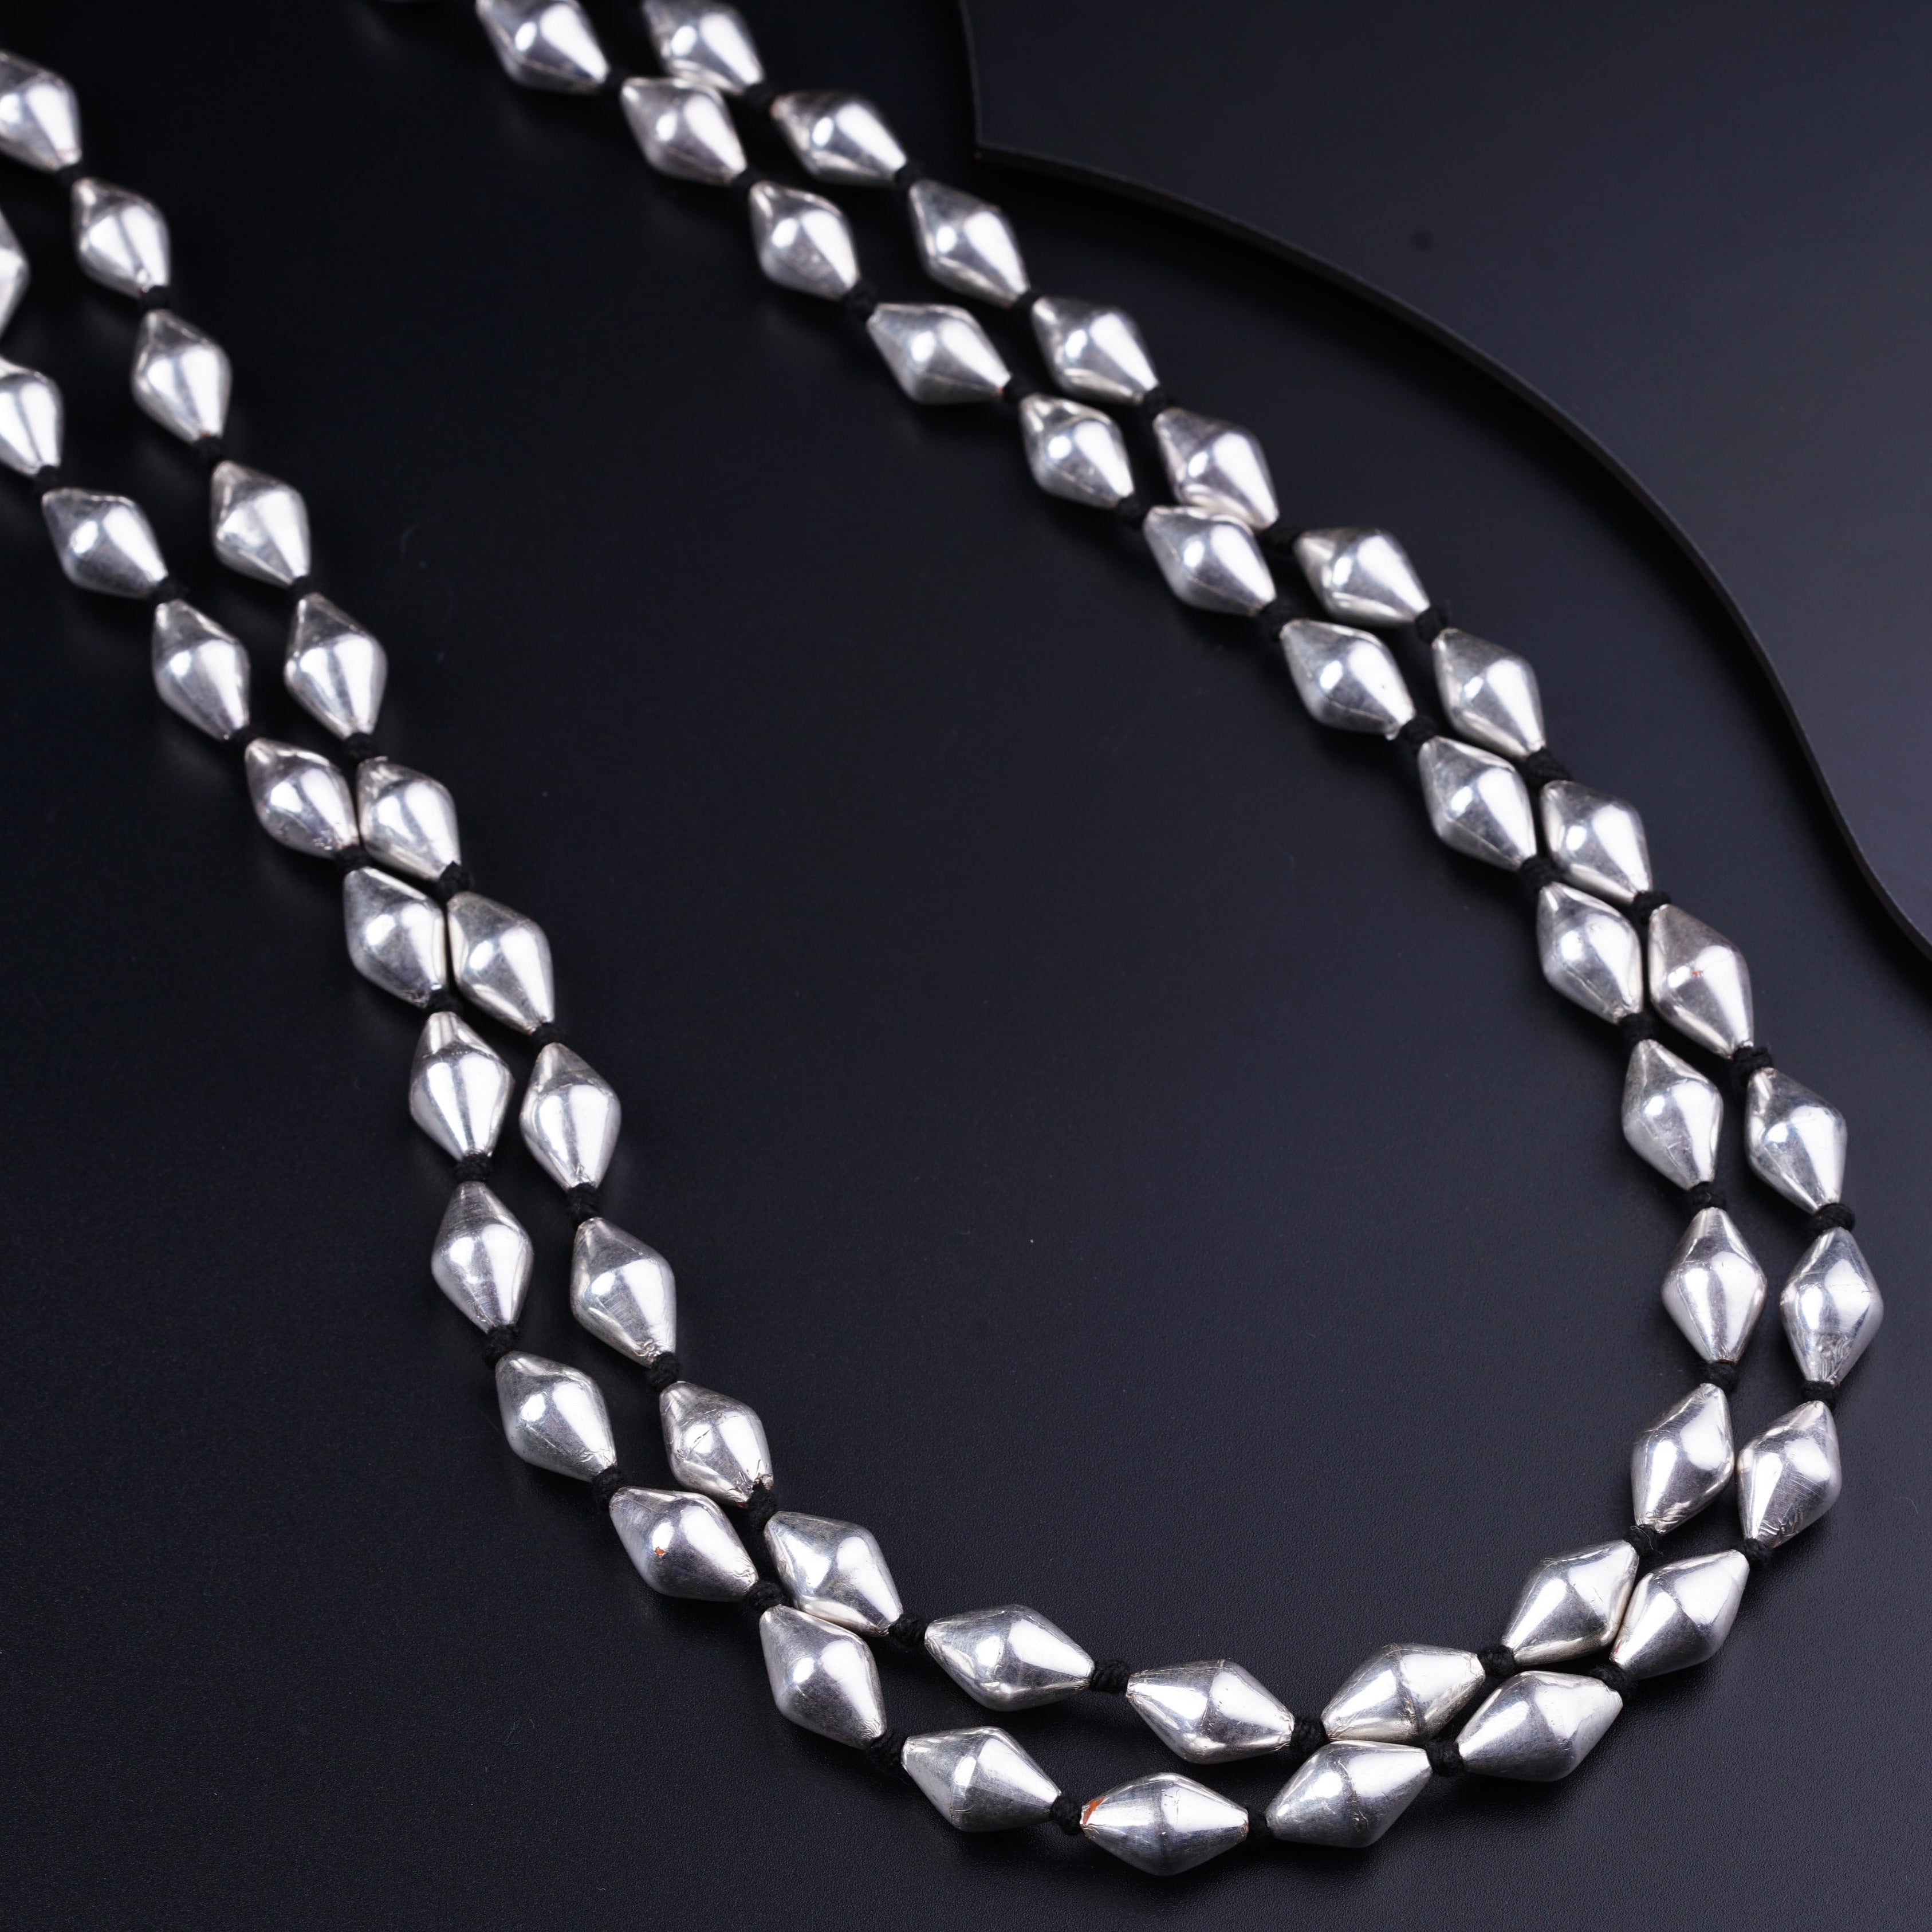 a long silver necklace on a black surface